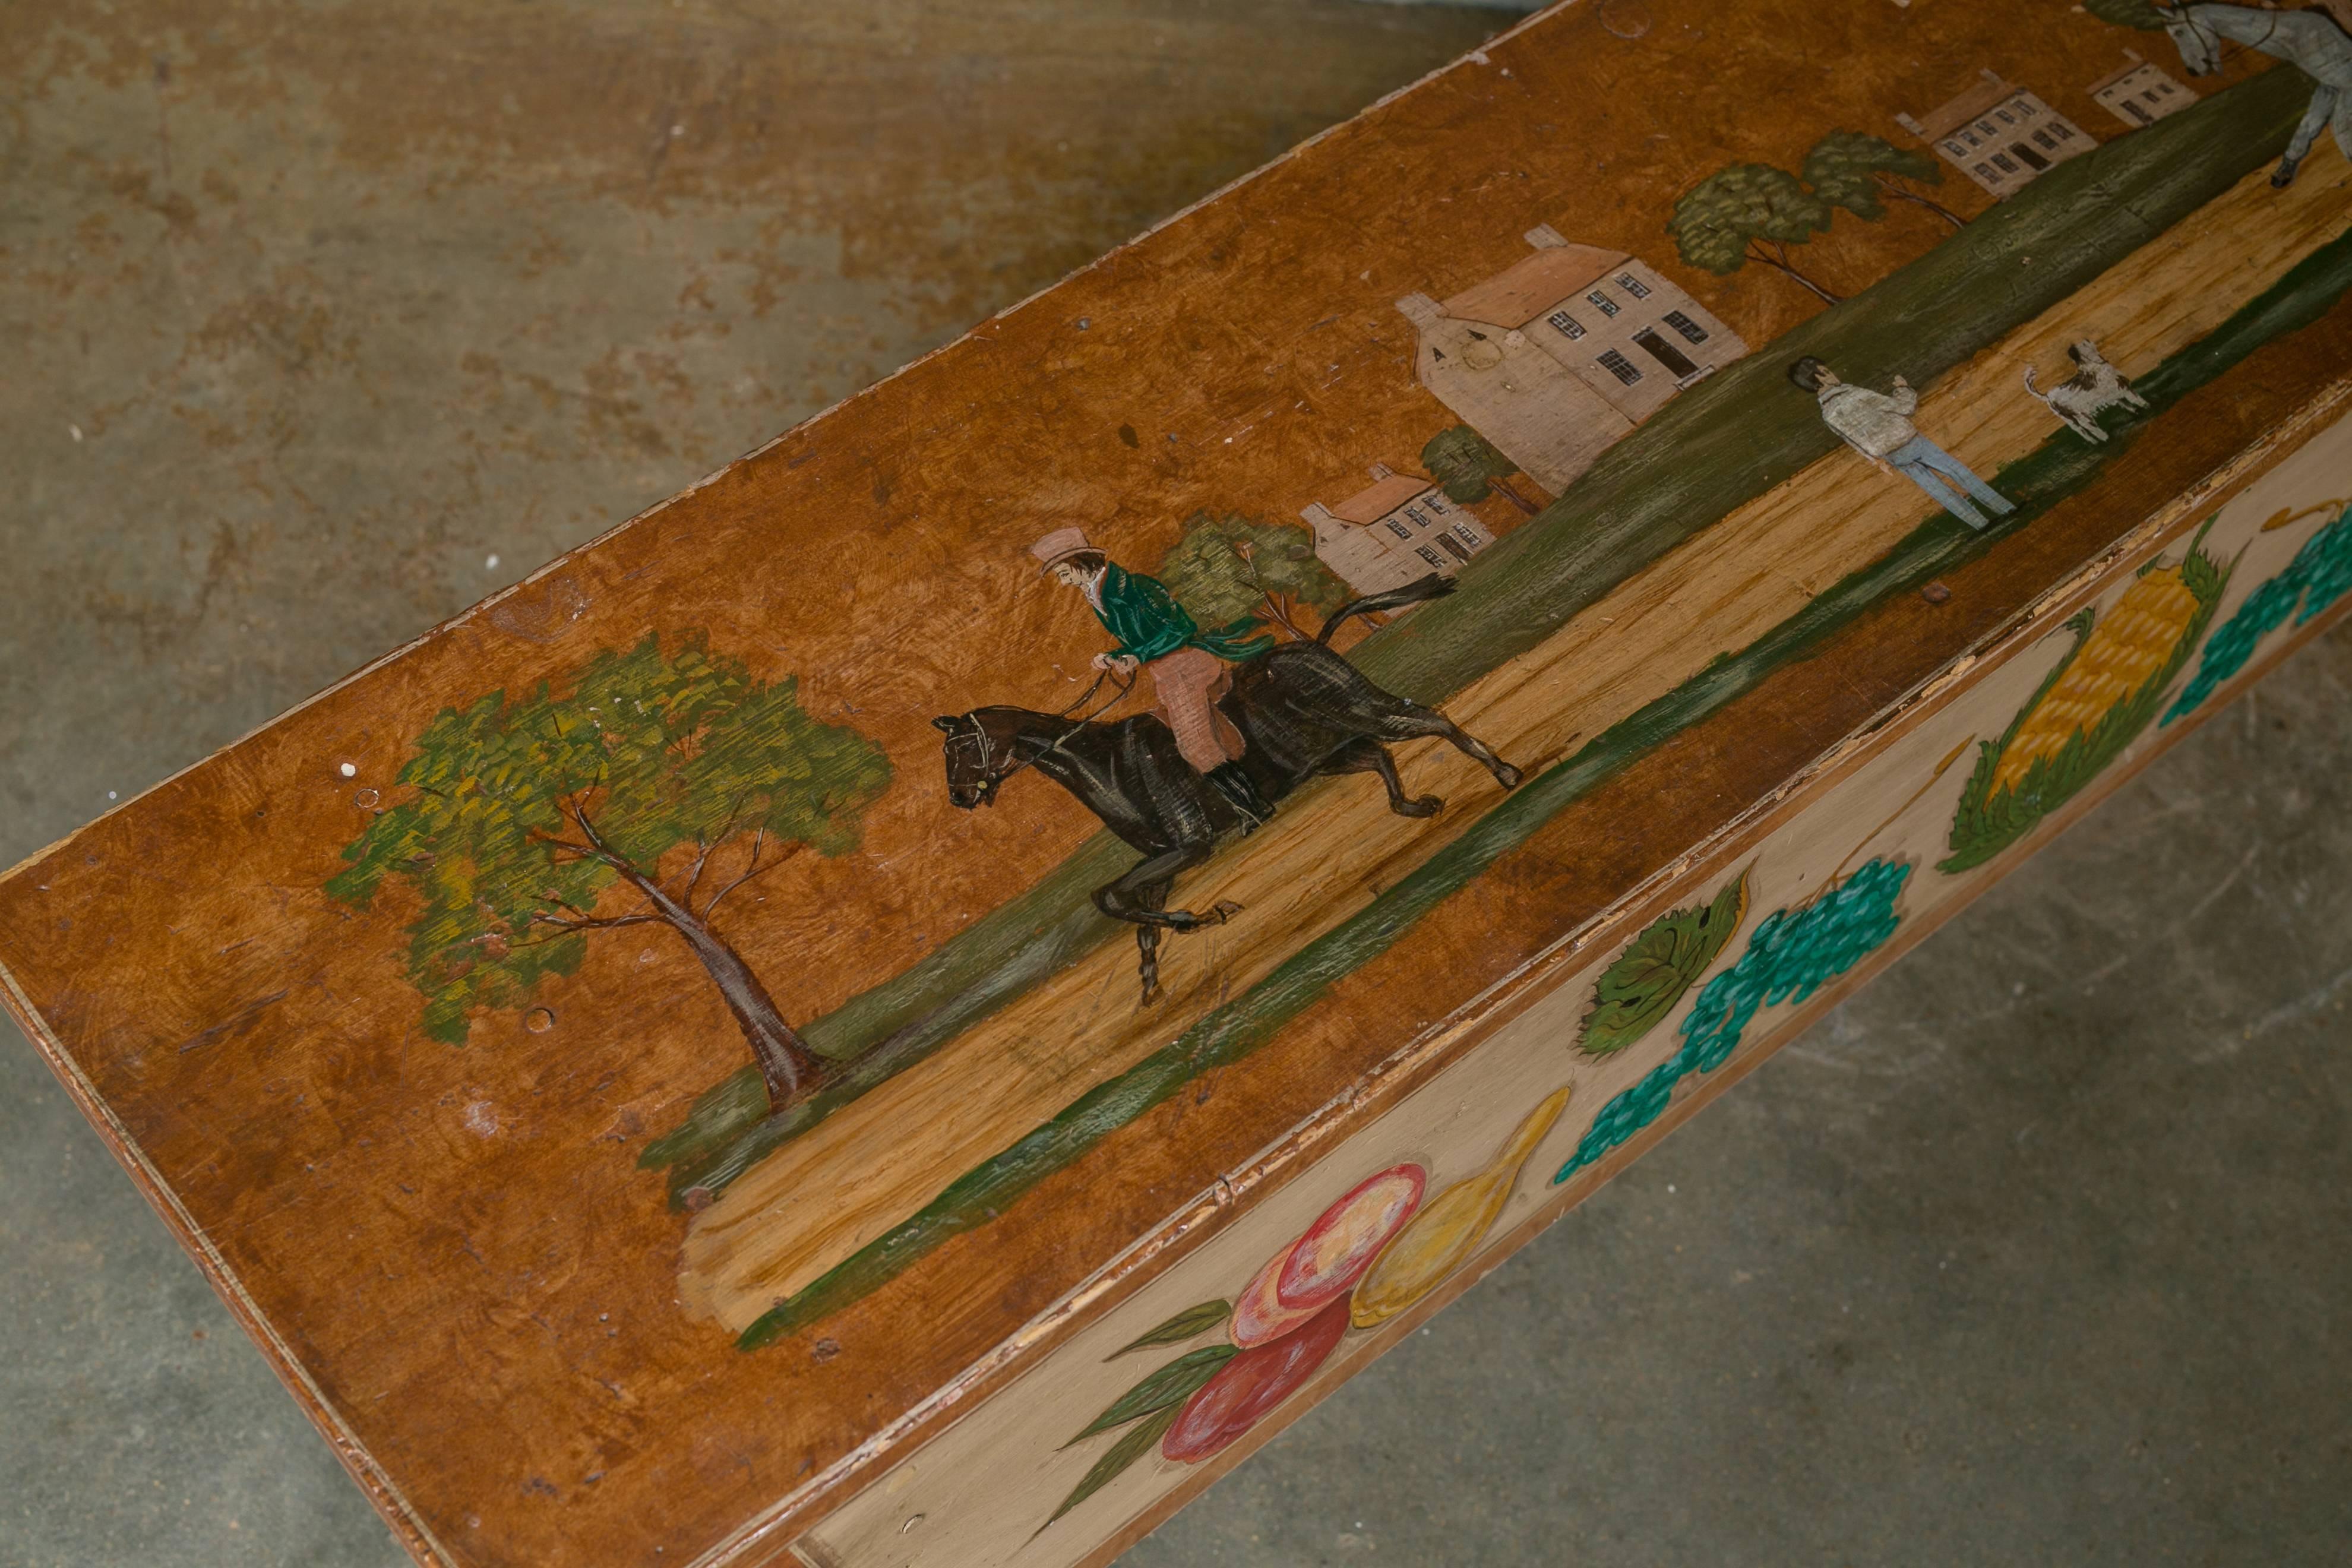 American Antique Wooden Bench Hand-Painted by Artist Lew Hudnall, circa 1890